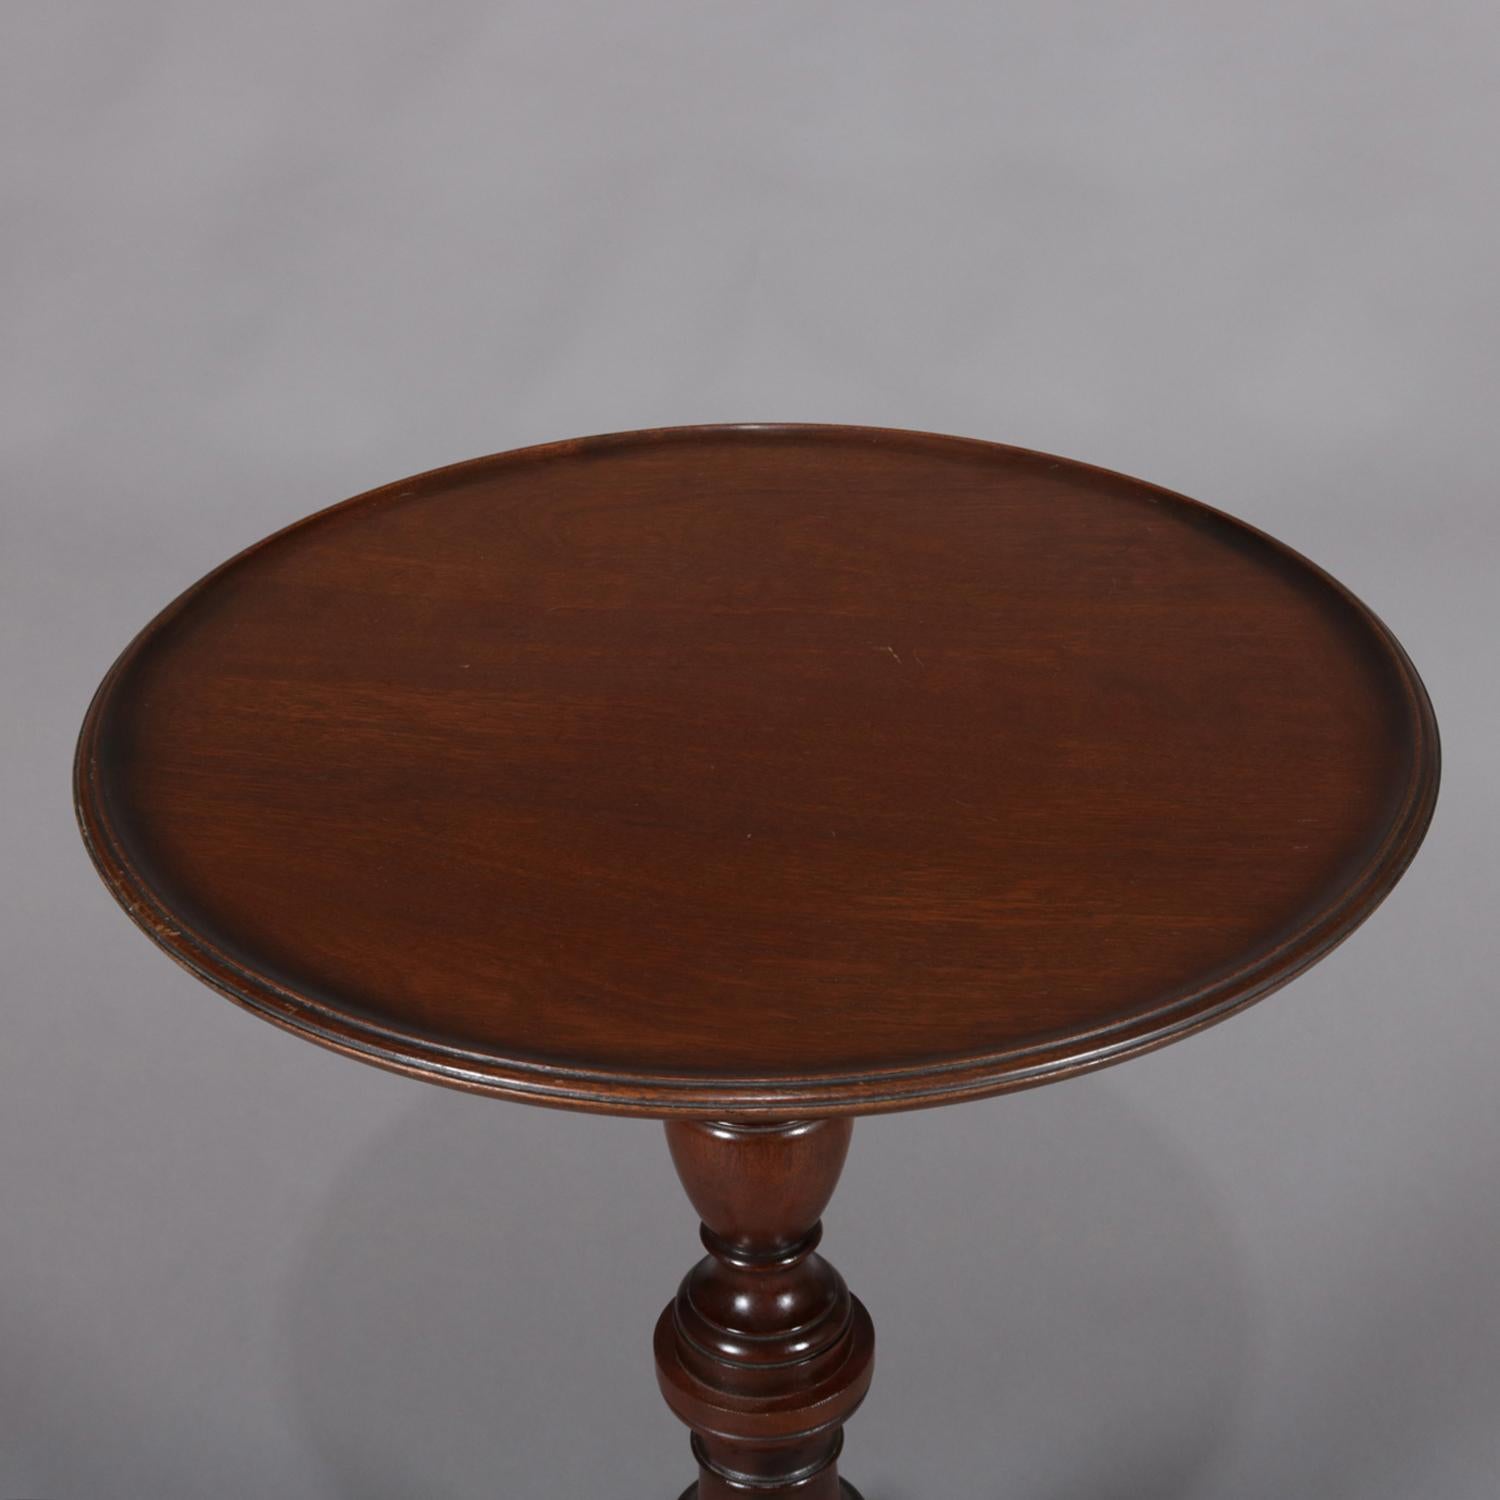 20th Century Vintage Queen Anne Mahogany Tripod Side Stand by Kittinger, circa 1940